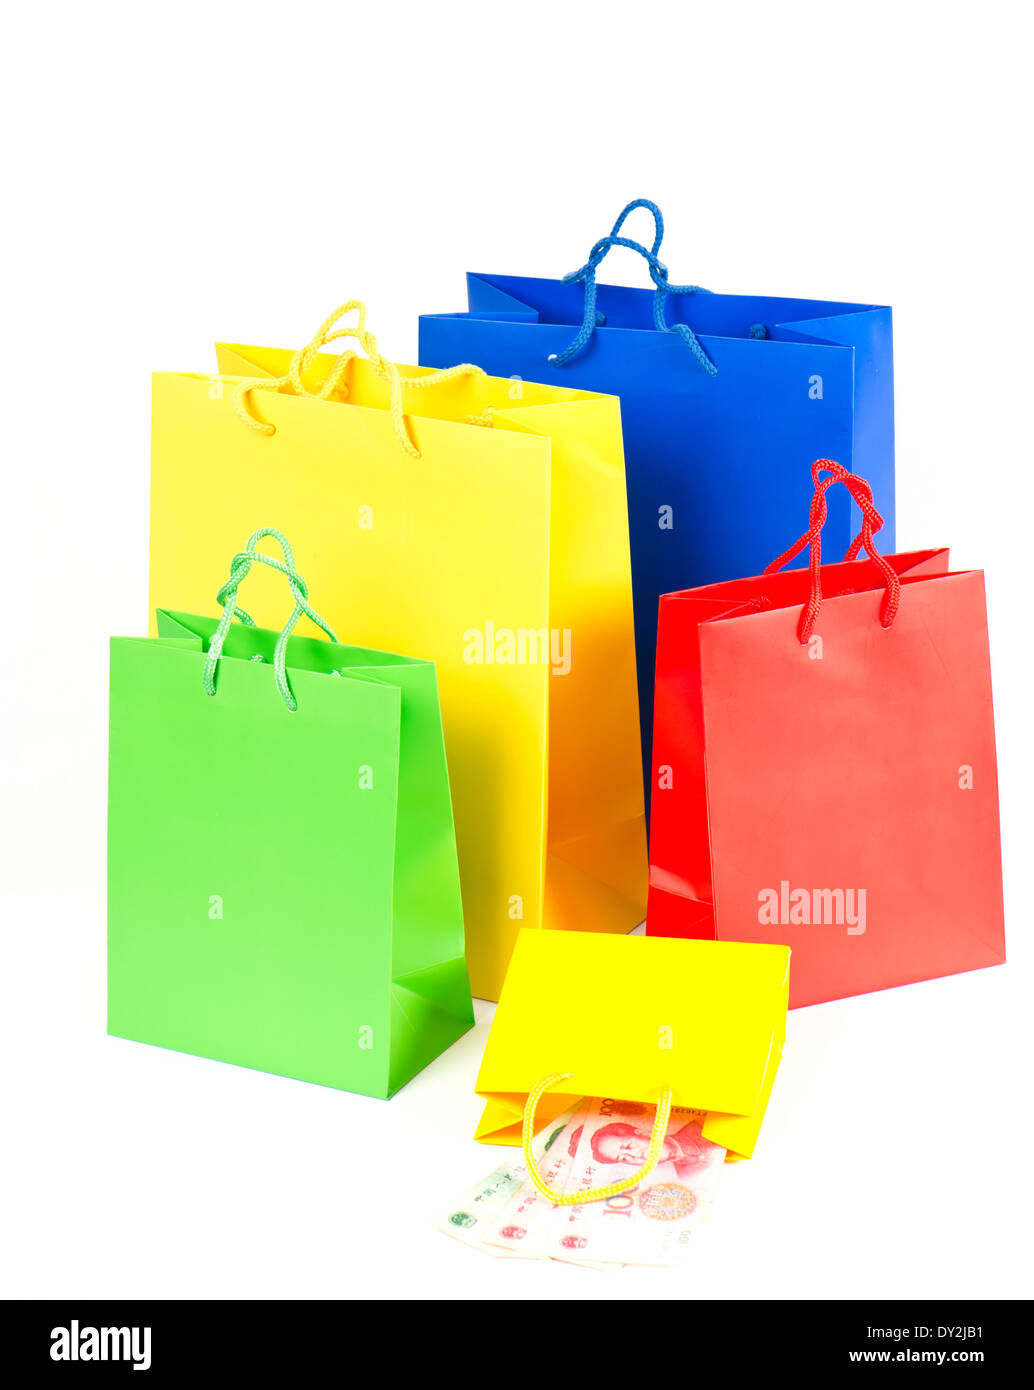 shopping bags red, blue, yellow, green Stock Photo